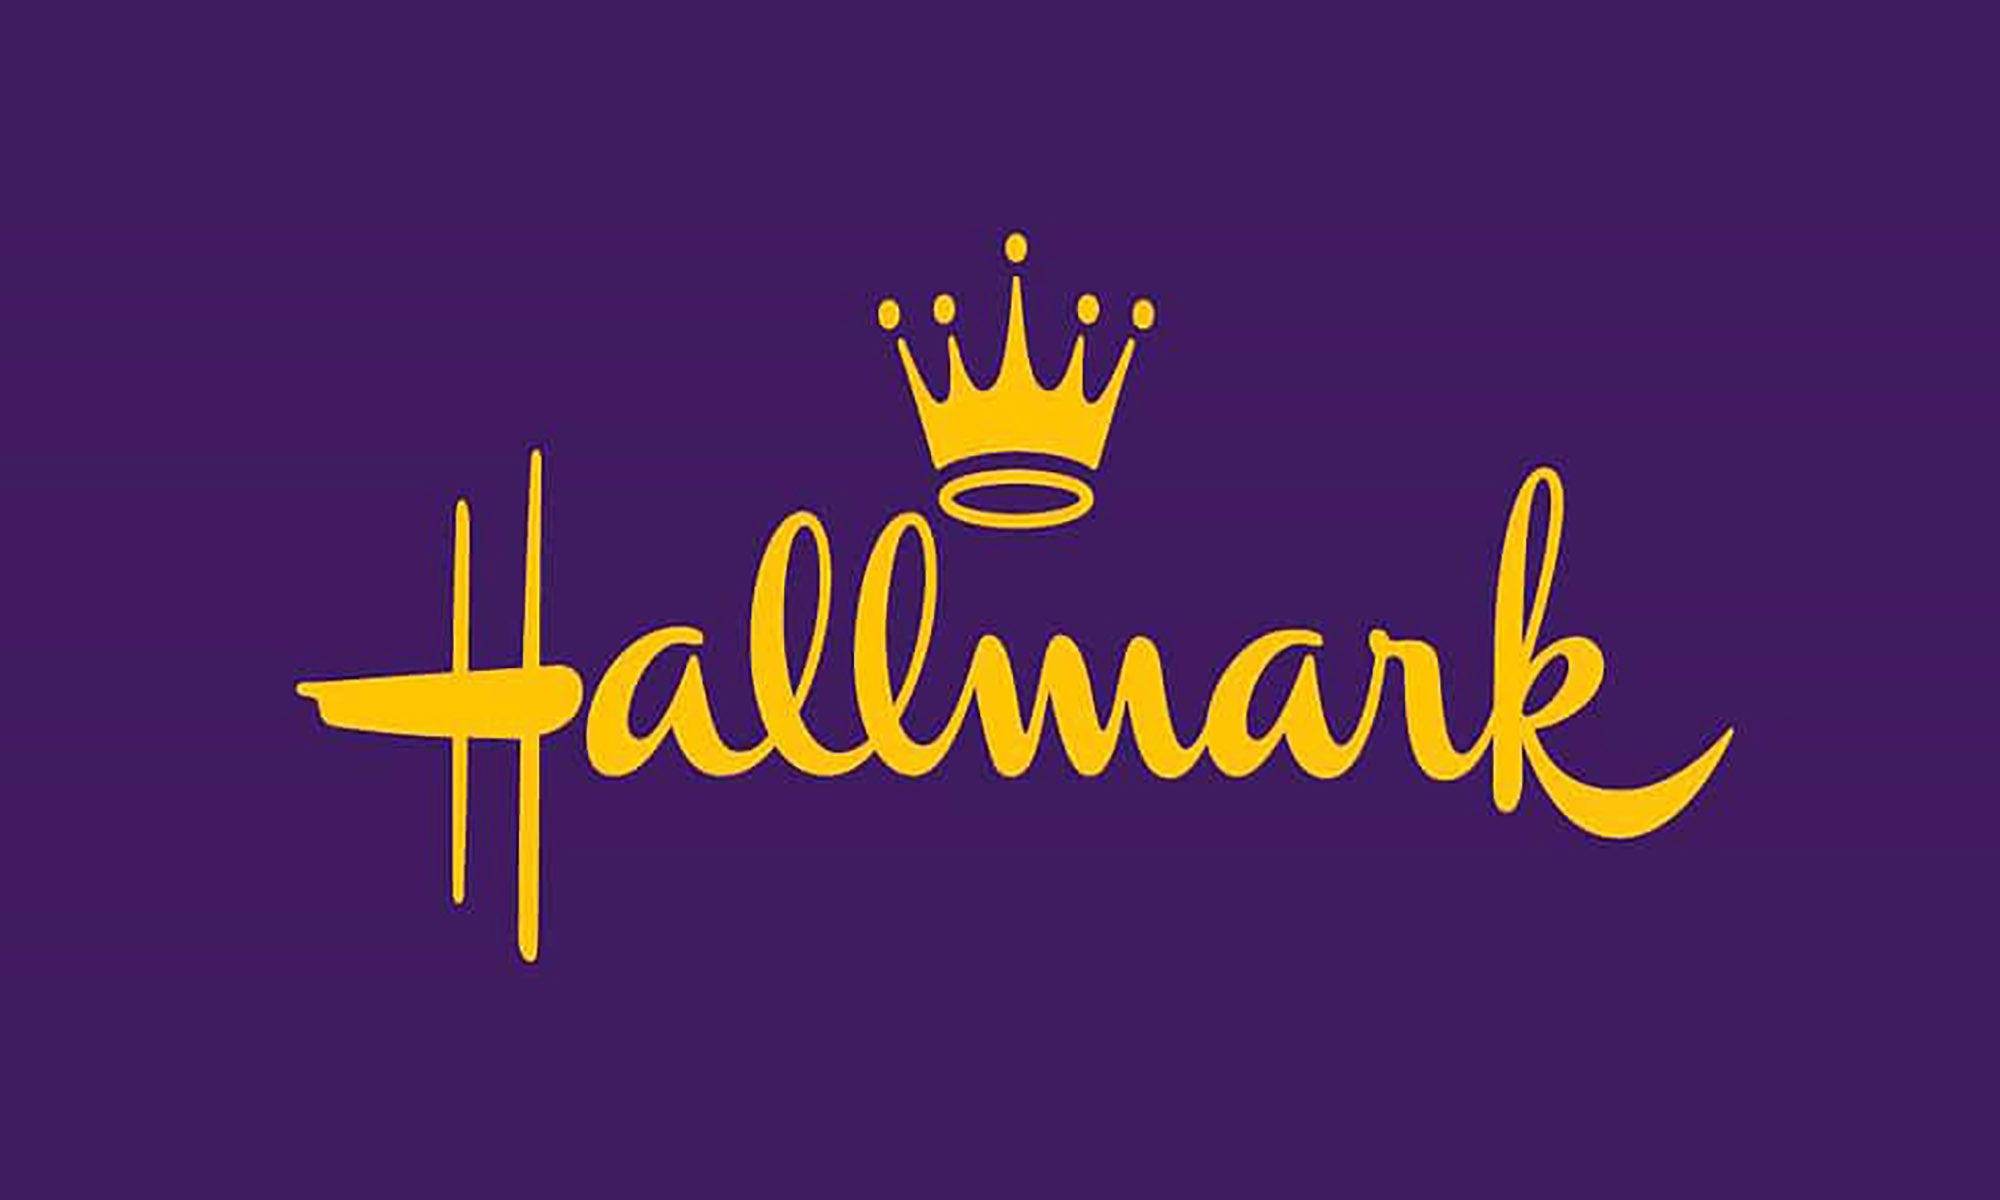 Image for Watch Hallmark's Pop Culture Connection panel from New York Comic Con 2022